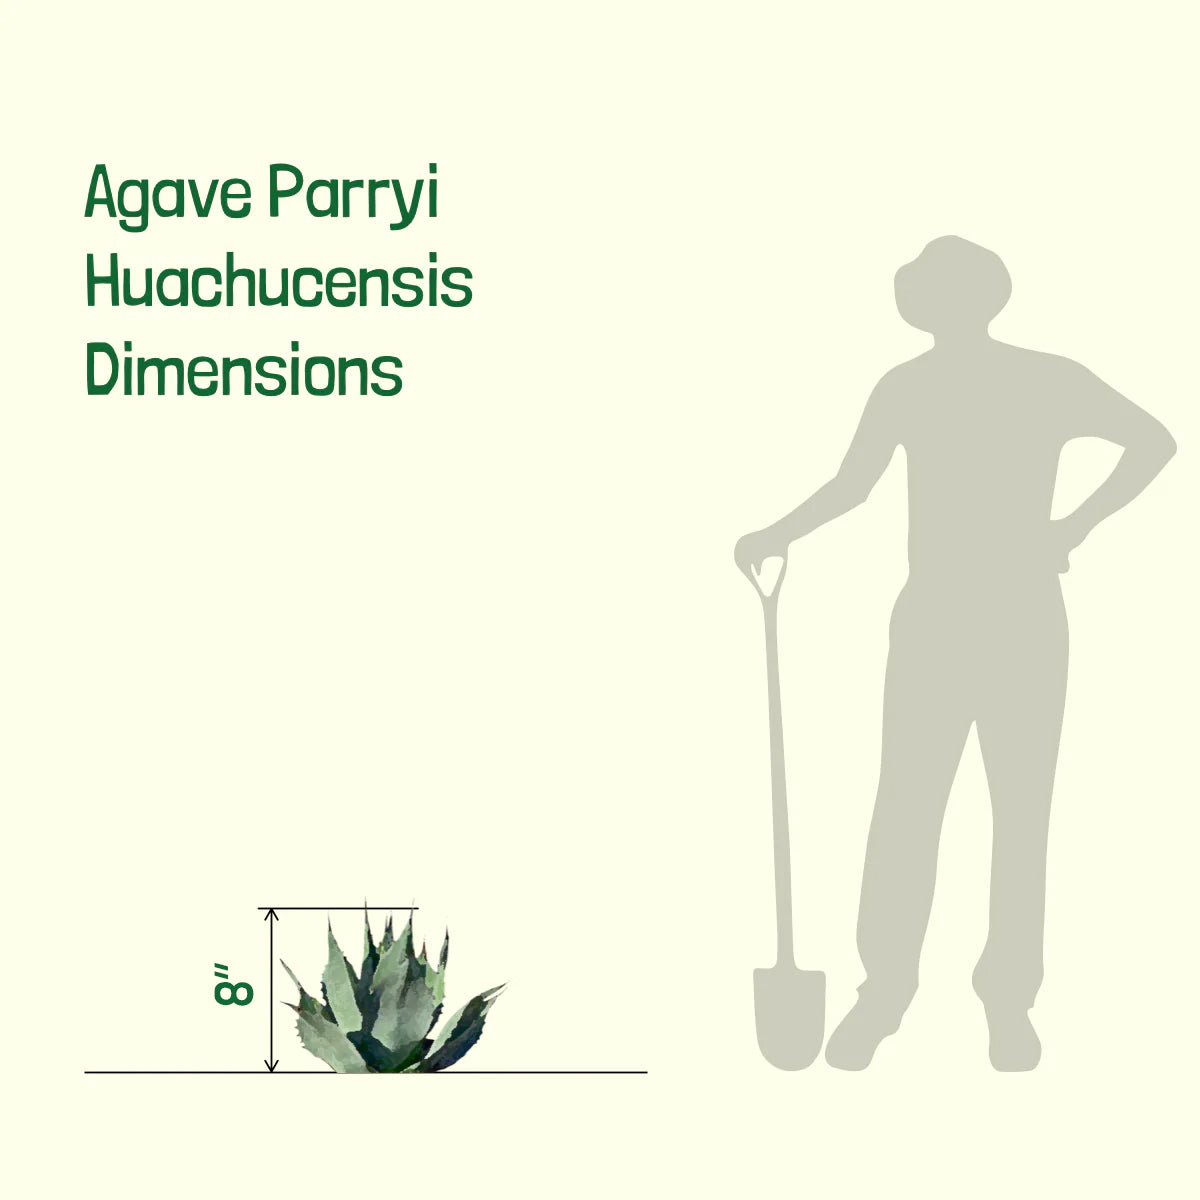 Agave Parryi Huachucensis